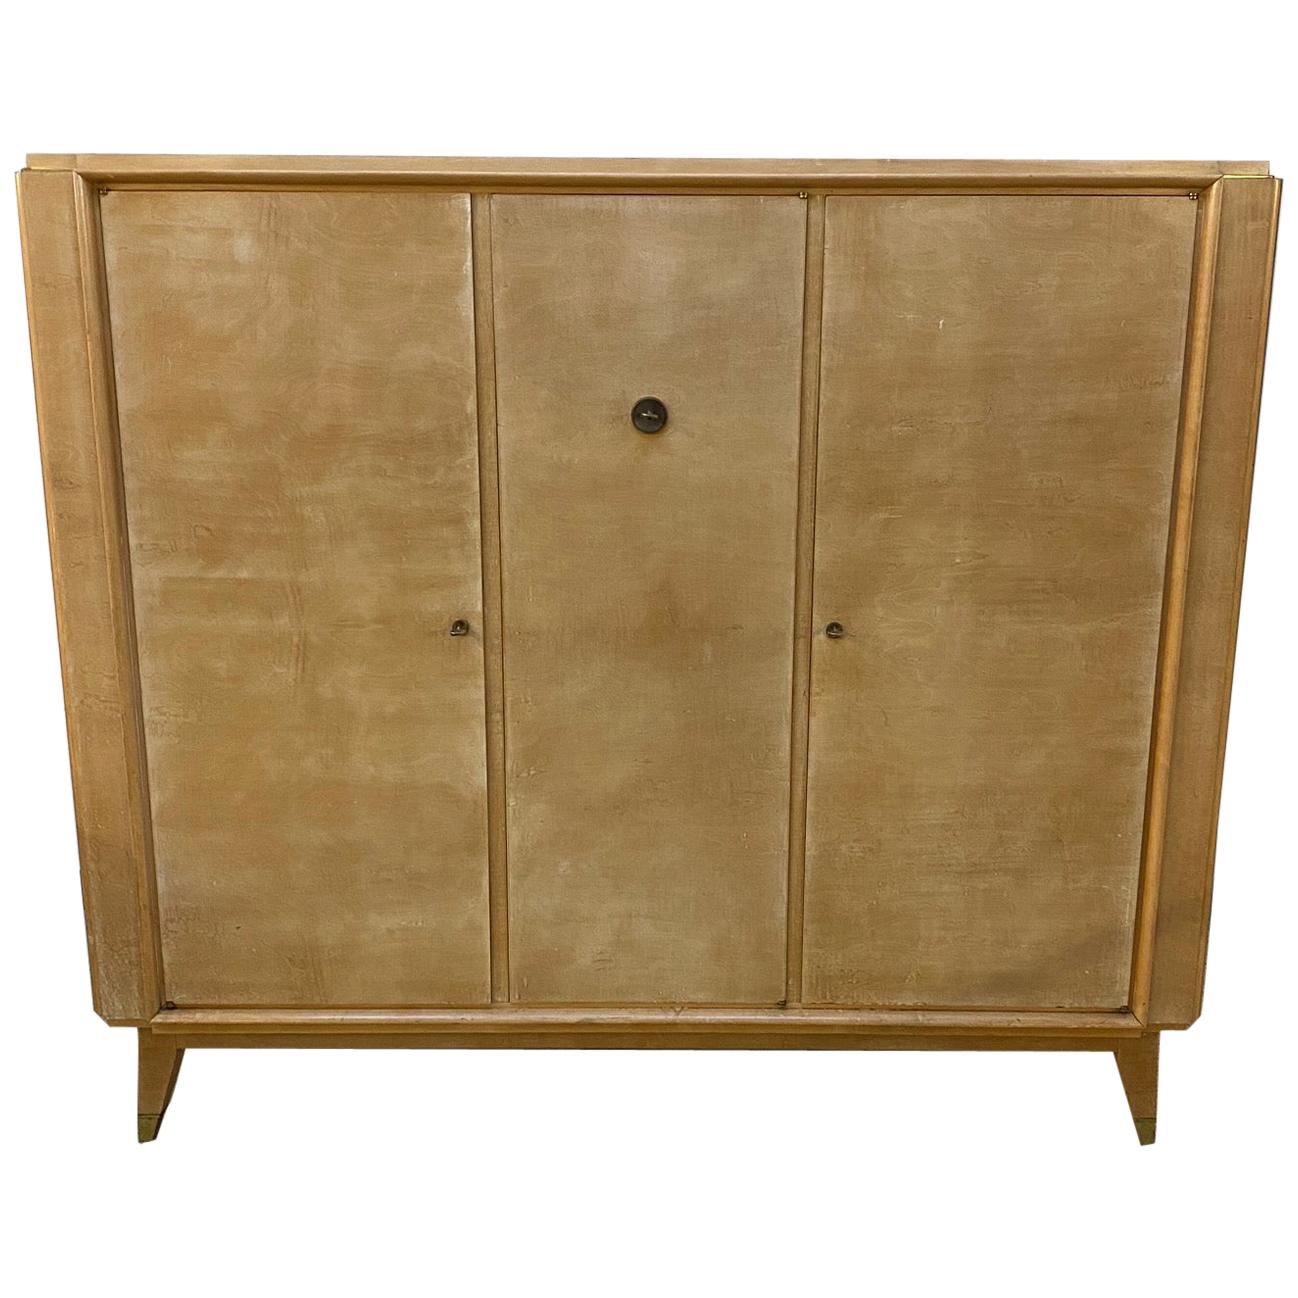 André Beaudoin, Art Deco Cabinet in Sycamore and Bronze, circa 1940-1950 For Sale